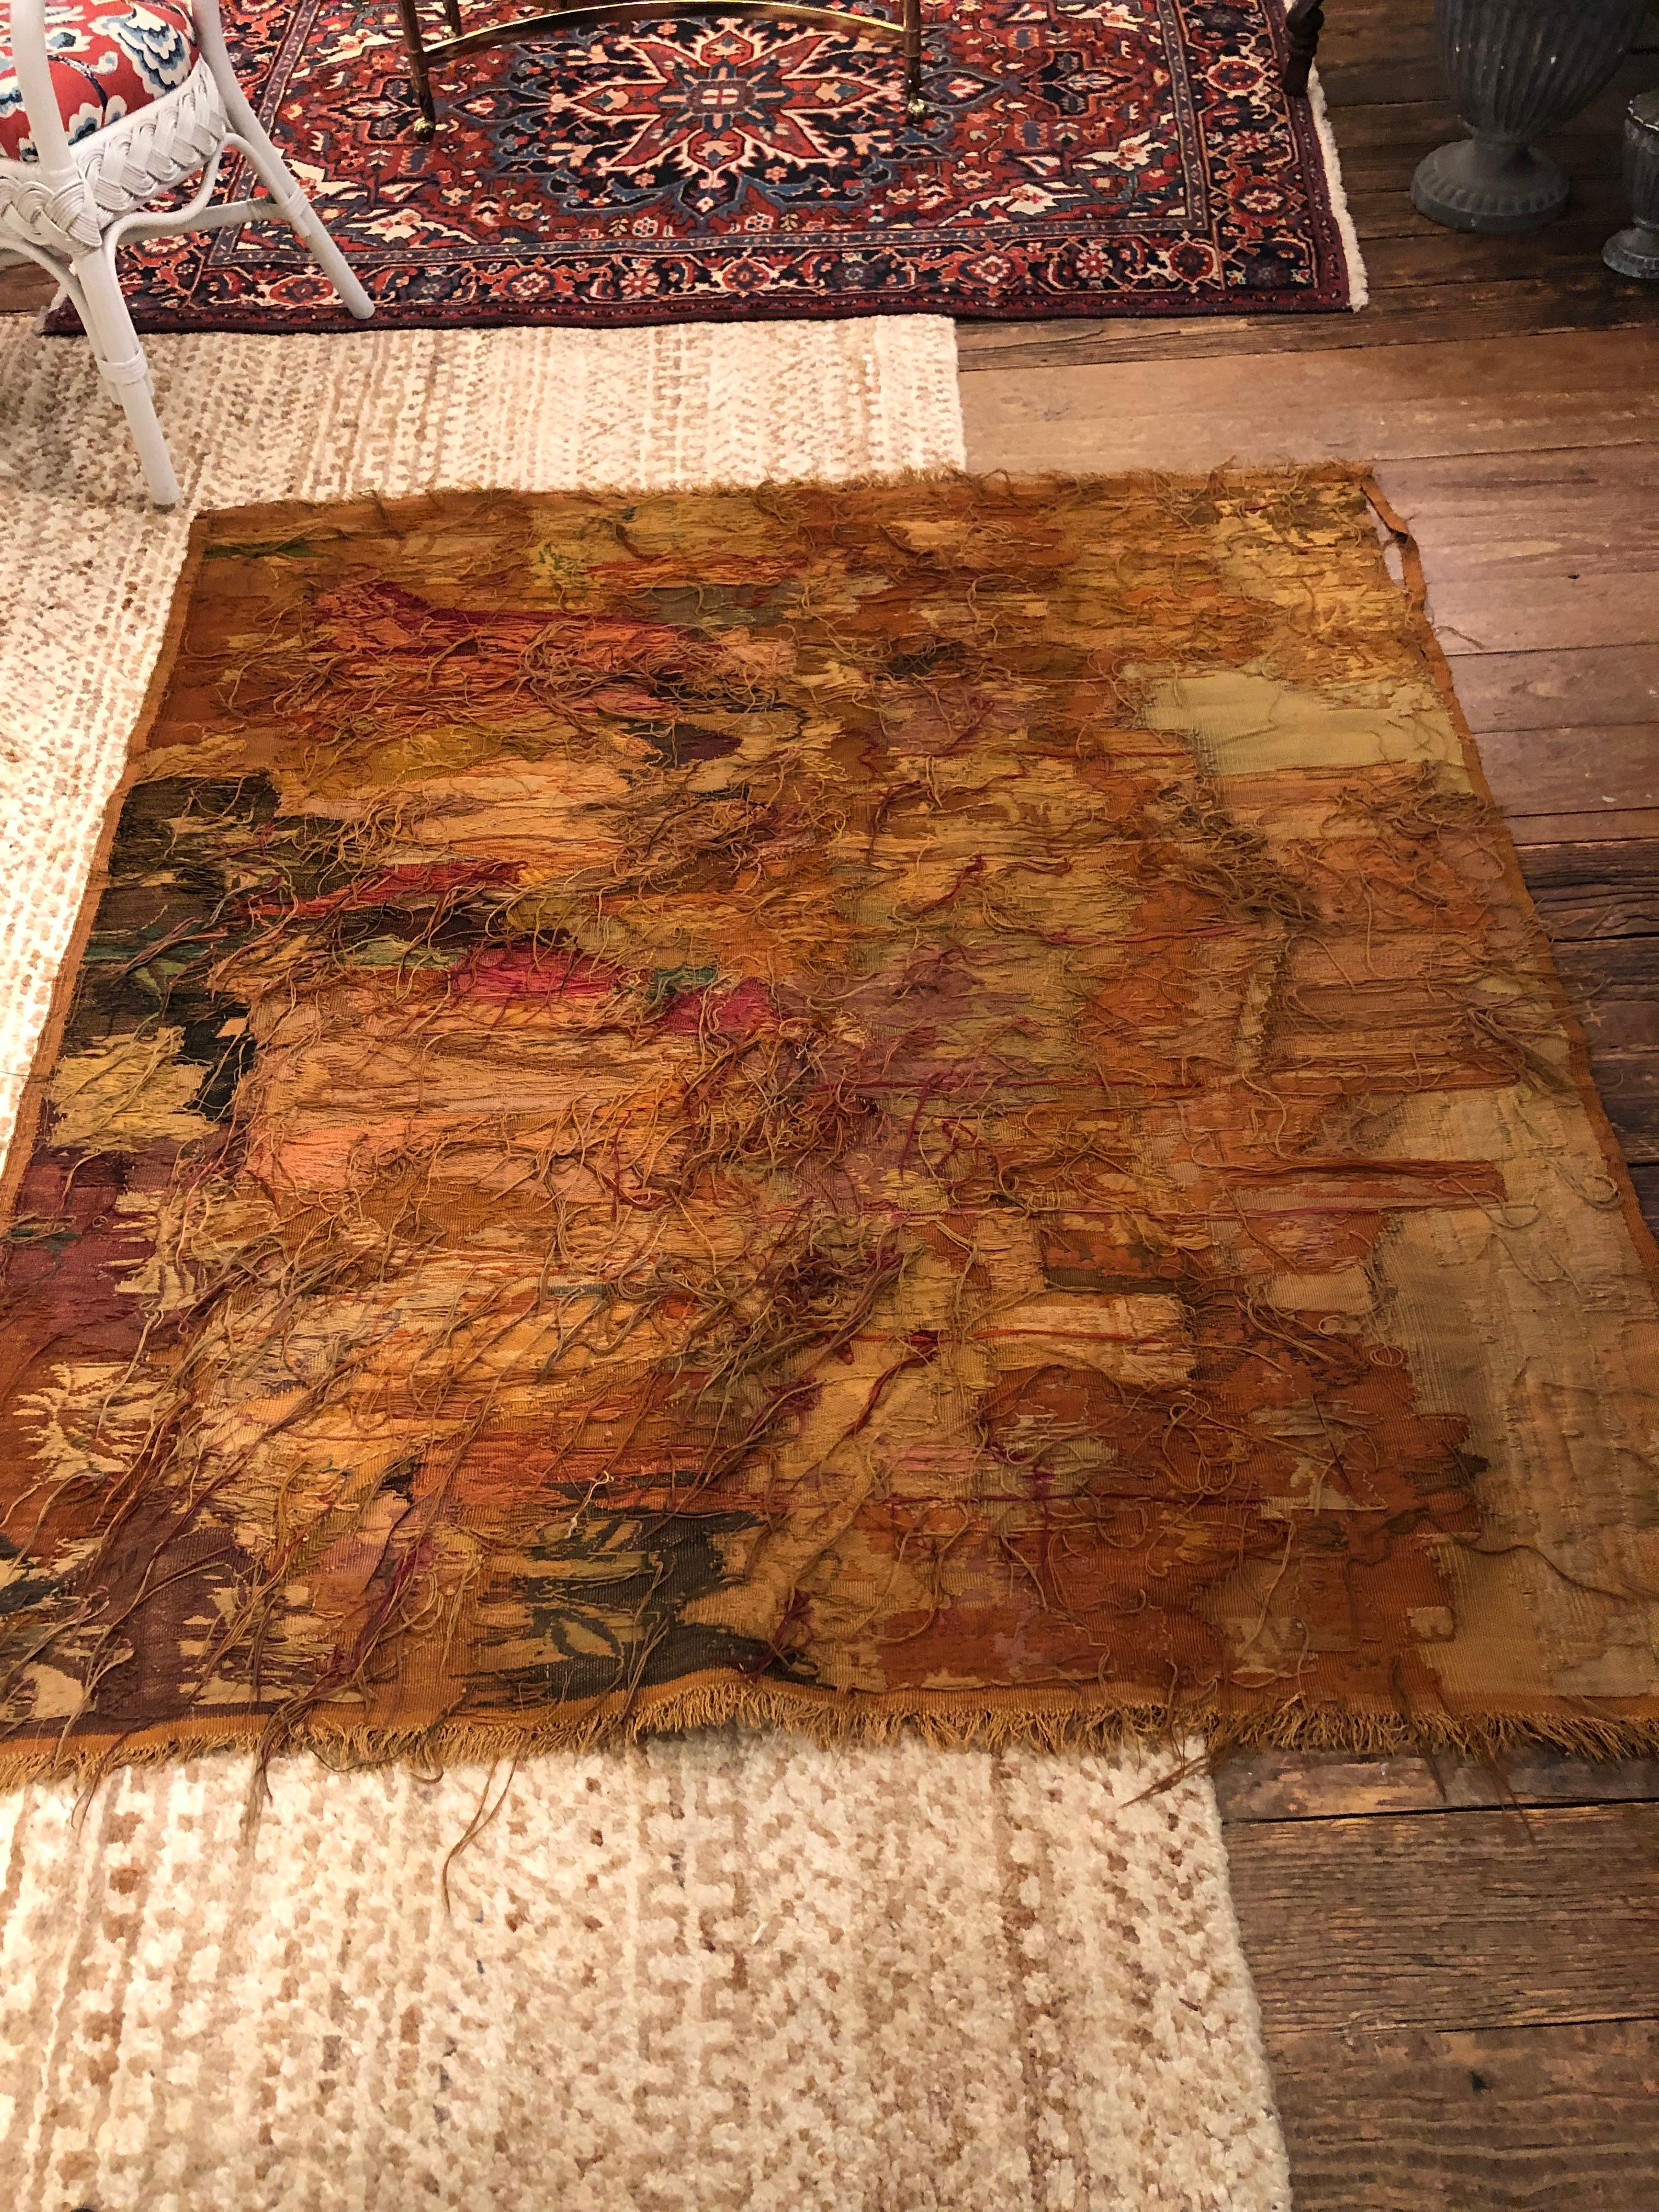 Gorgeous Intricately Detailed 19th Century Tapestry in Warm Autumn Tones For Sale 3